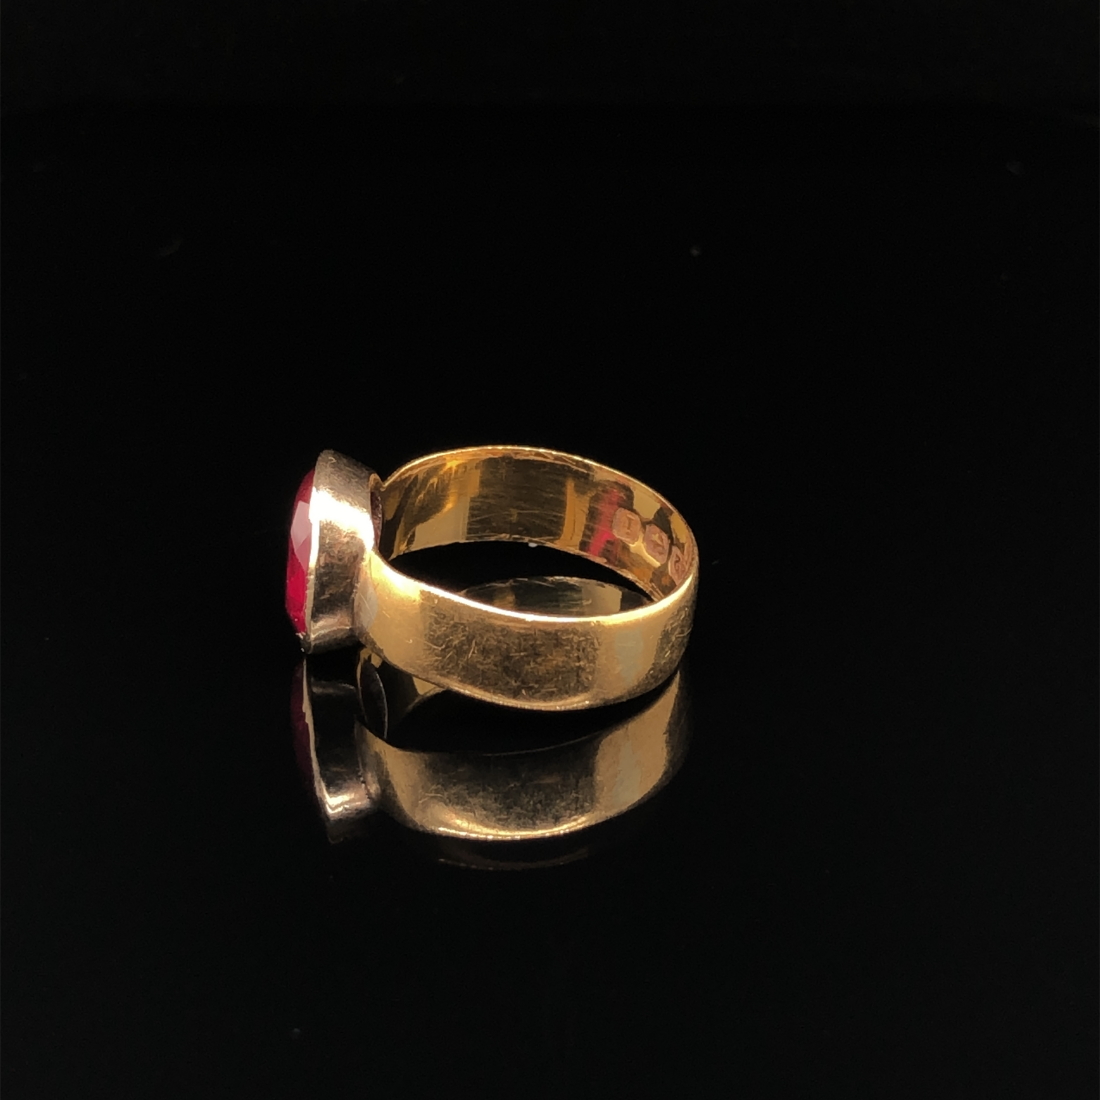 AN ANTIQUE 22ct HALLMARKED GOLD GEMSET RING, WITH A 10ct GOLD SETTING. DATED 1908, BIRMINGHAM. - Image 2 of 10